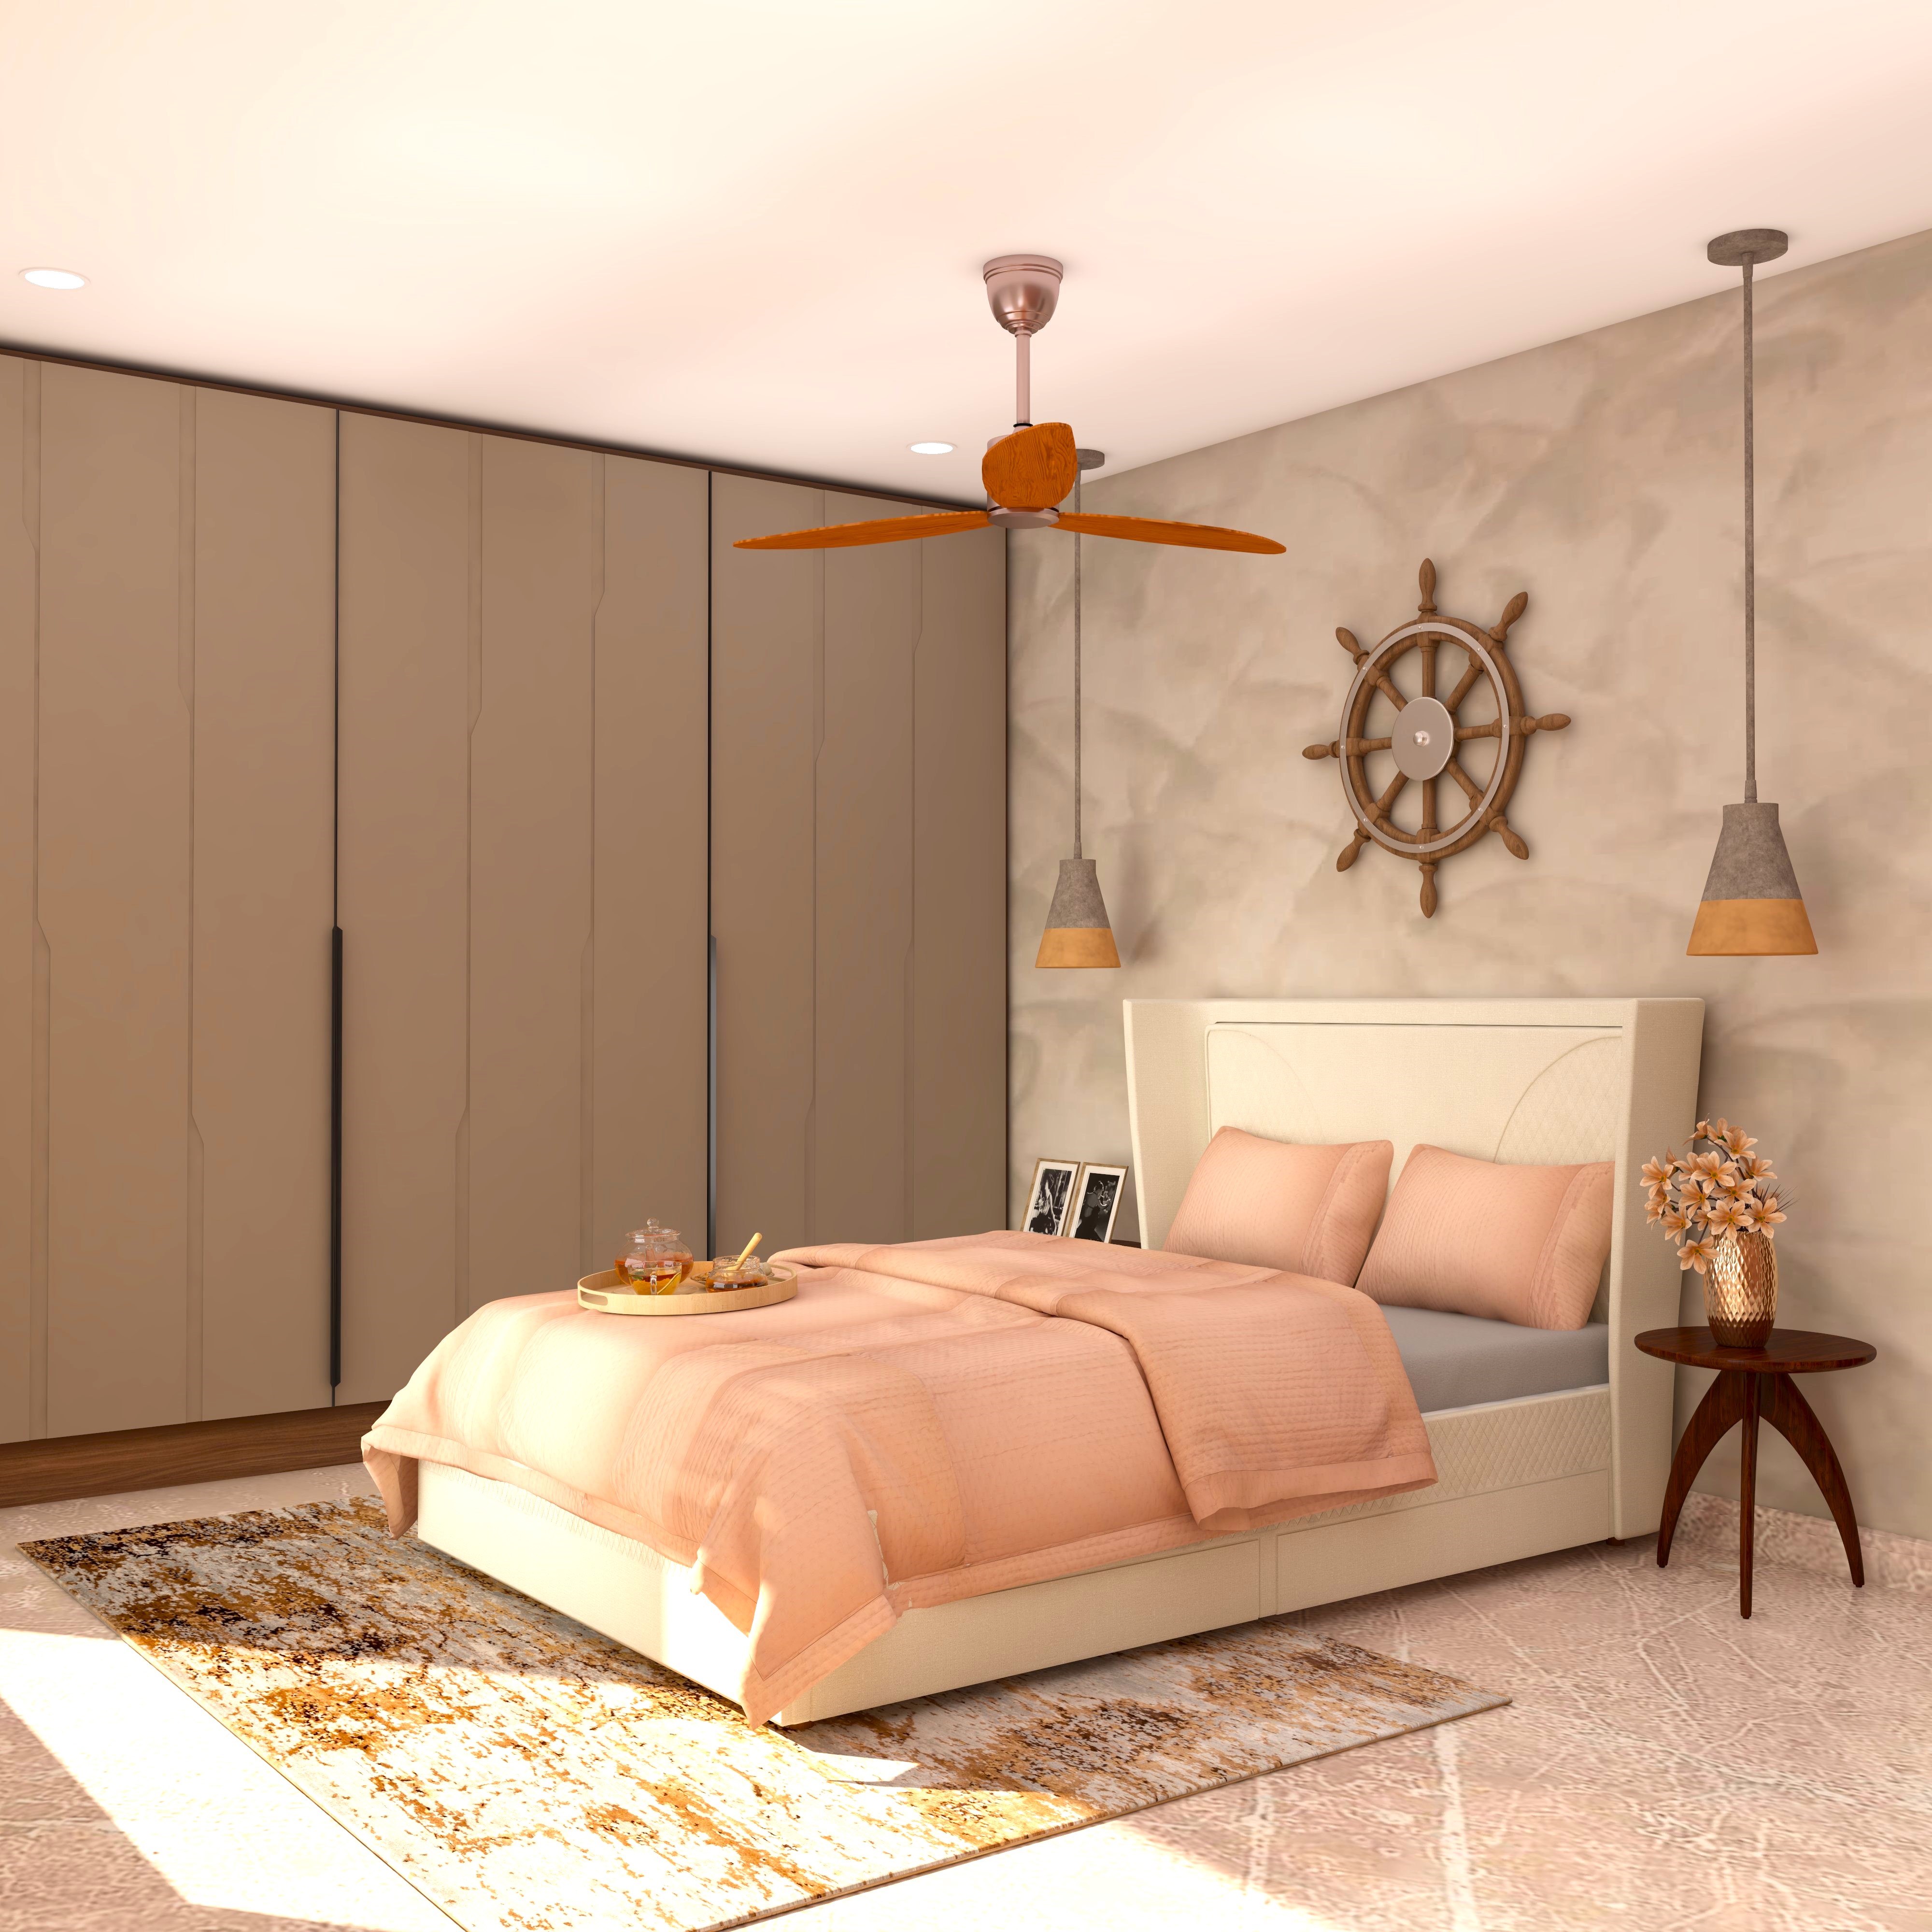 Bedroom with sliding wardrobe and pendant lights-Beautiful Homes